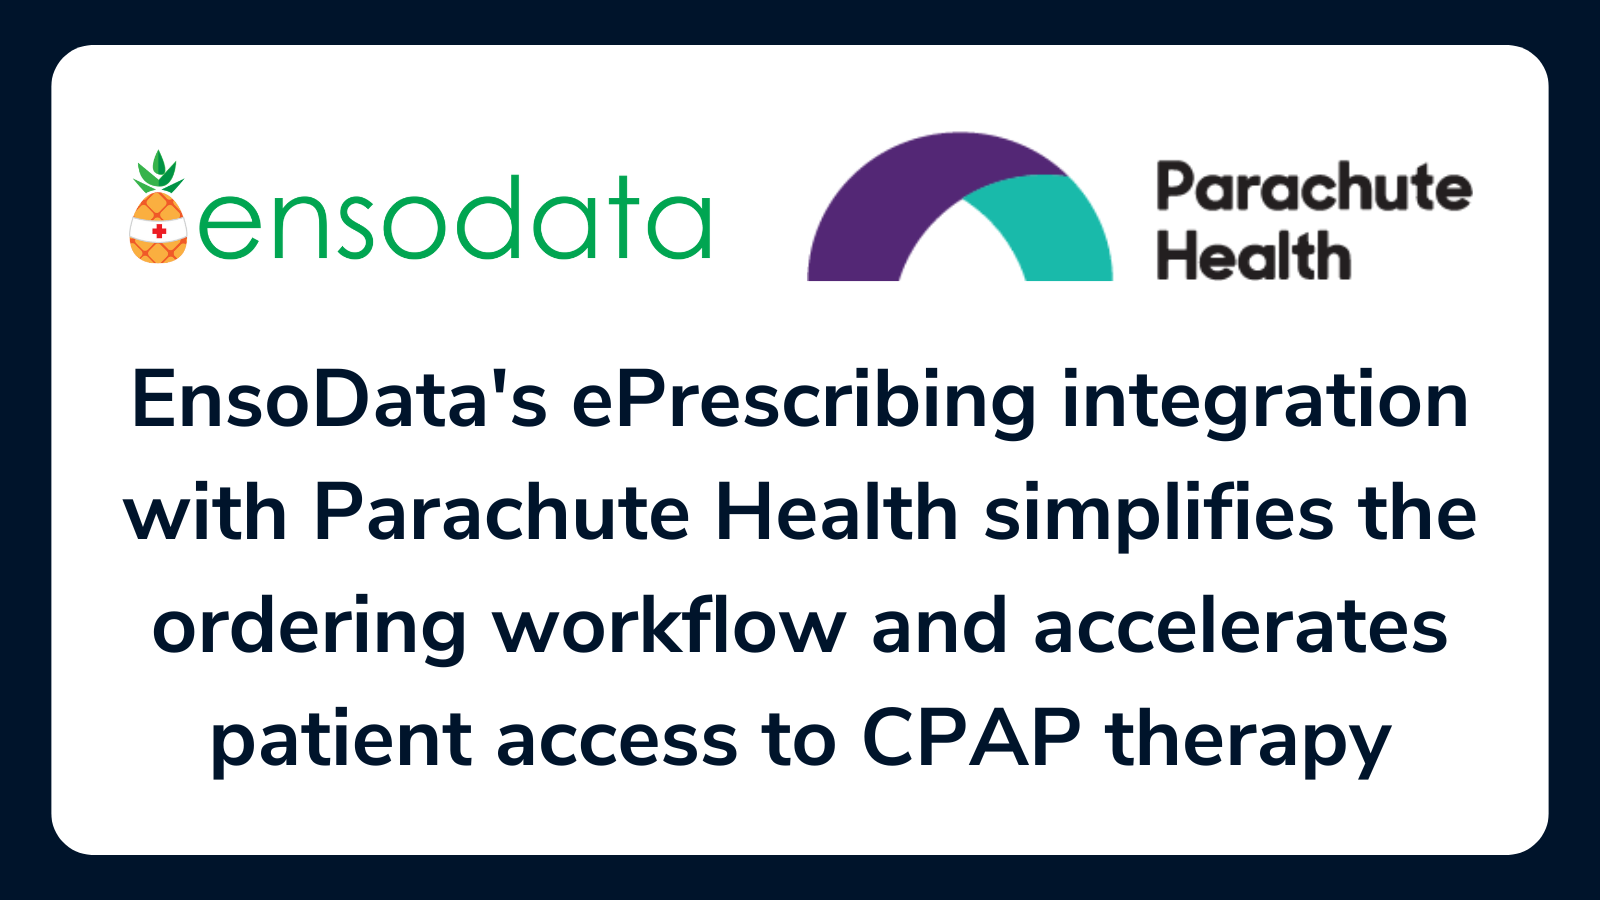 AI software integration between EnsoData and Parachute Health aims to connect sleep disorder diagnosis to therapy prescription.